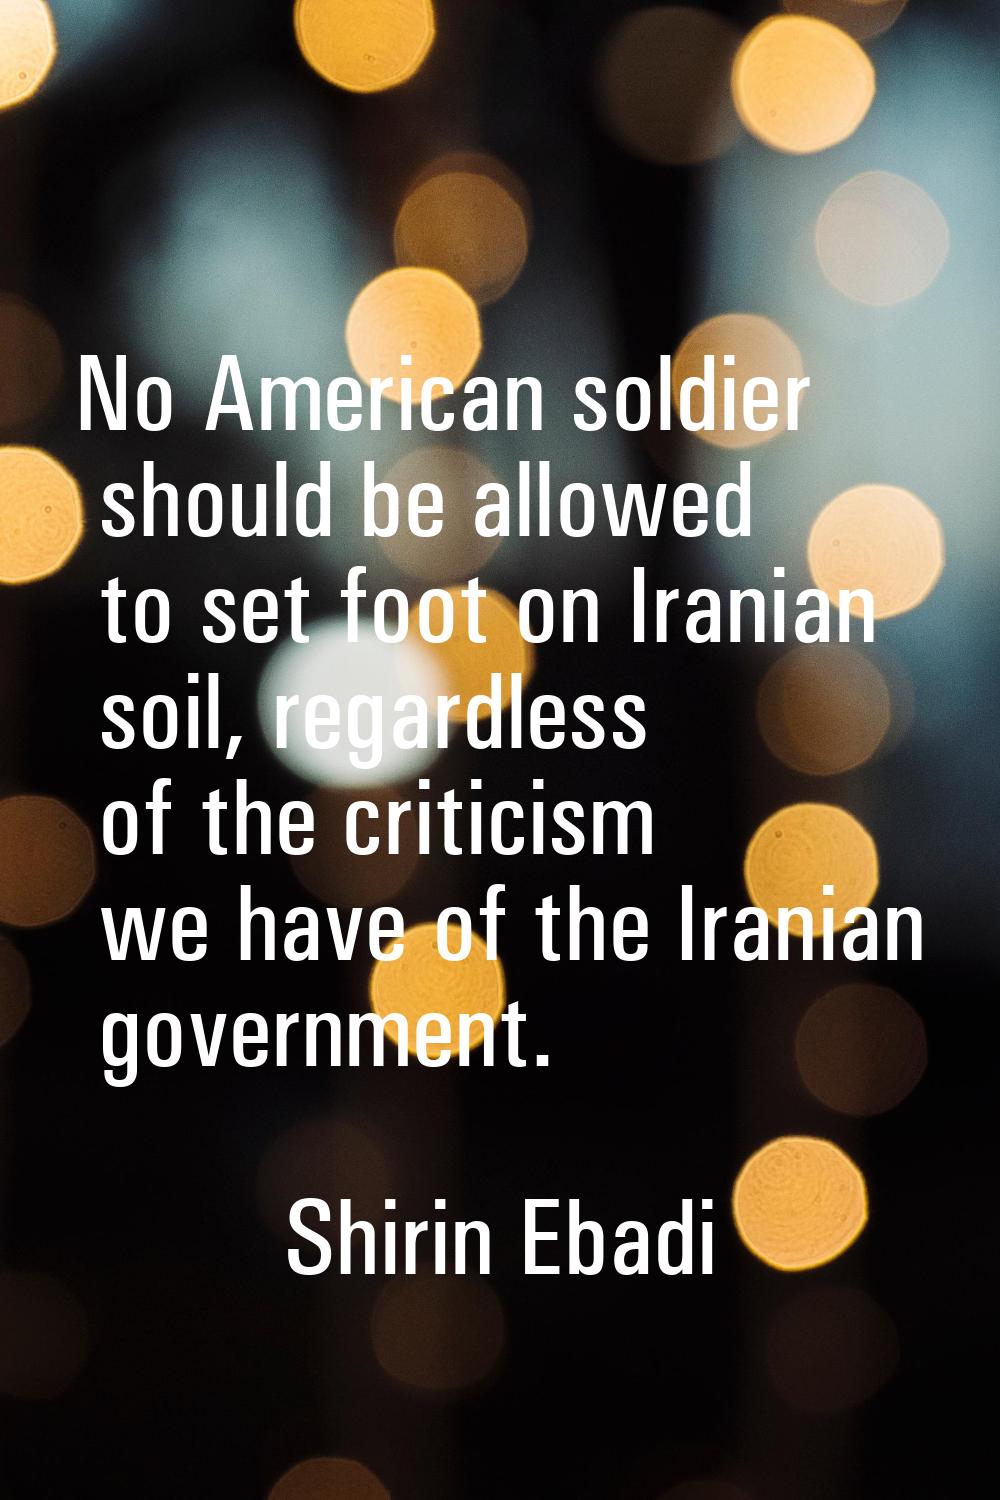 No American soldier should be allowed to set foot on Iranian soil, regardless of the criticism we h